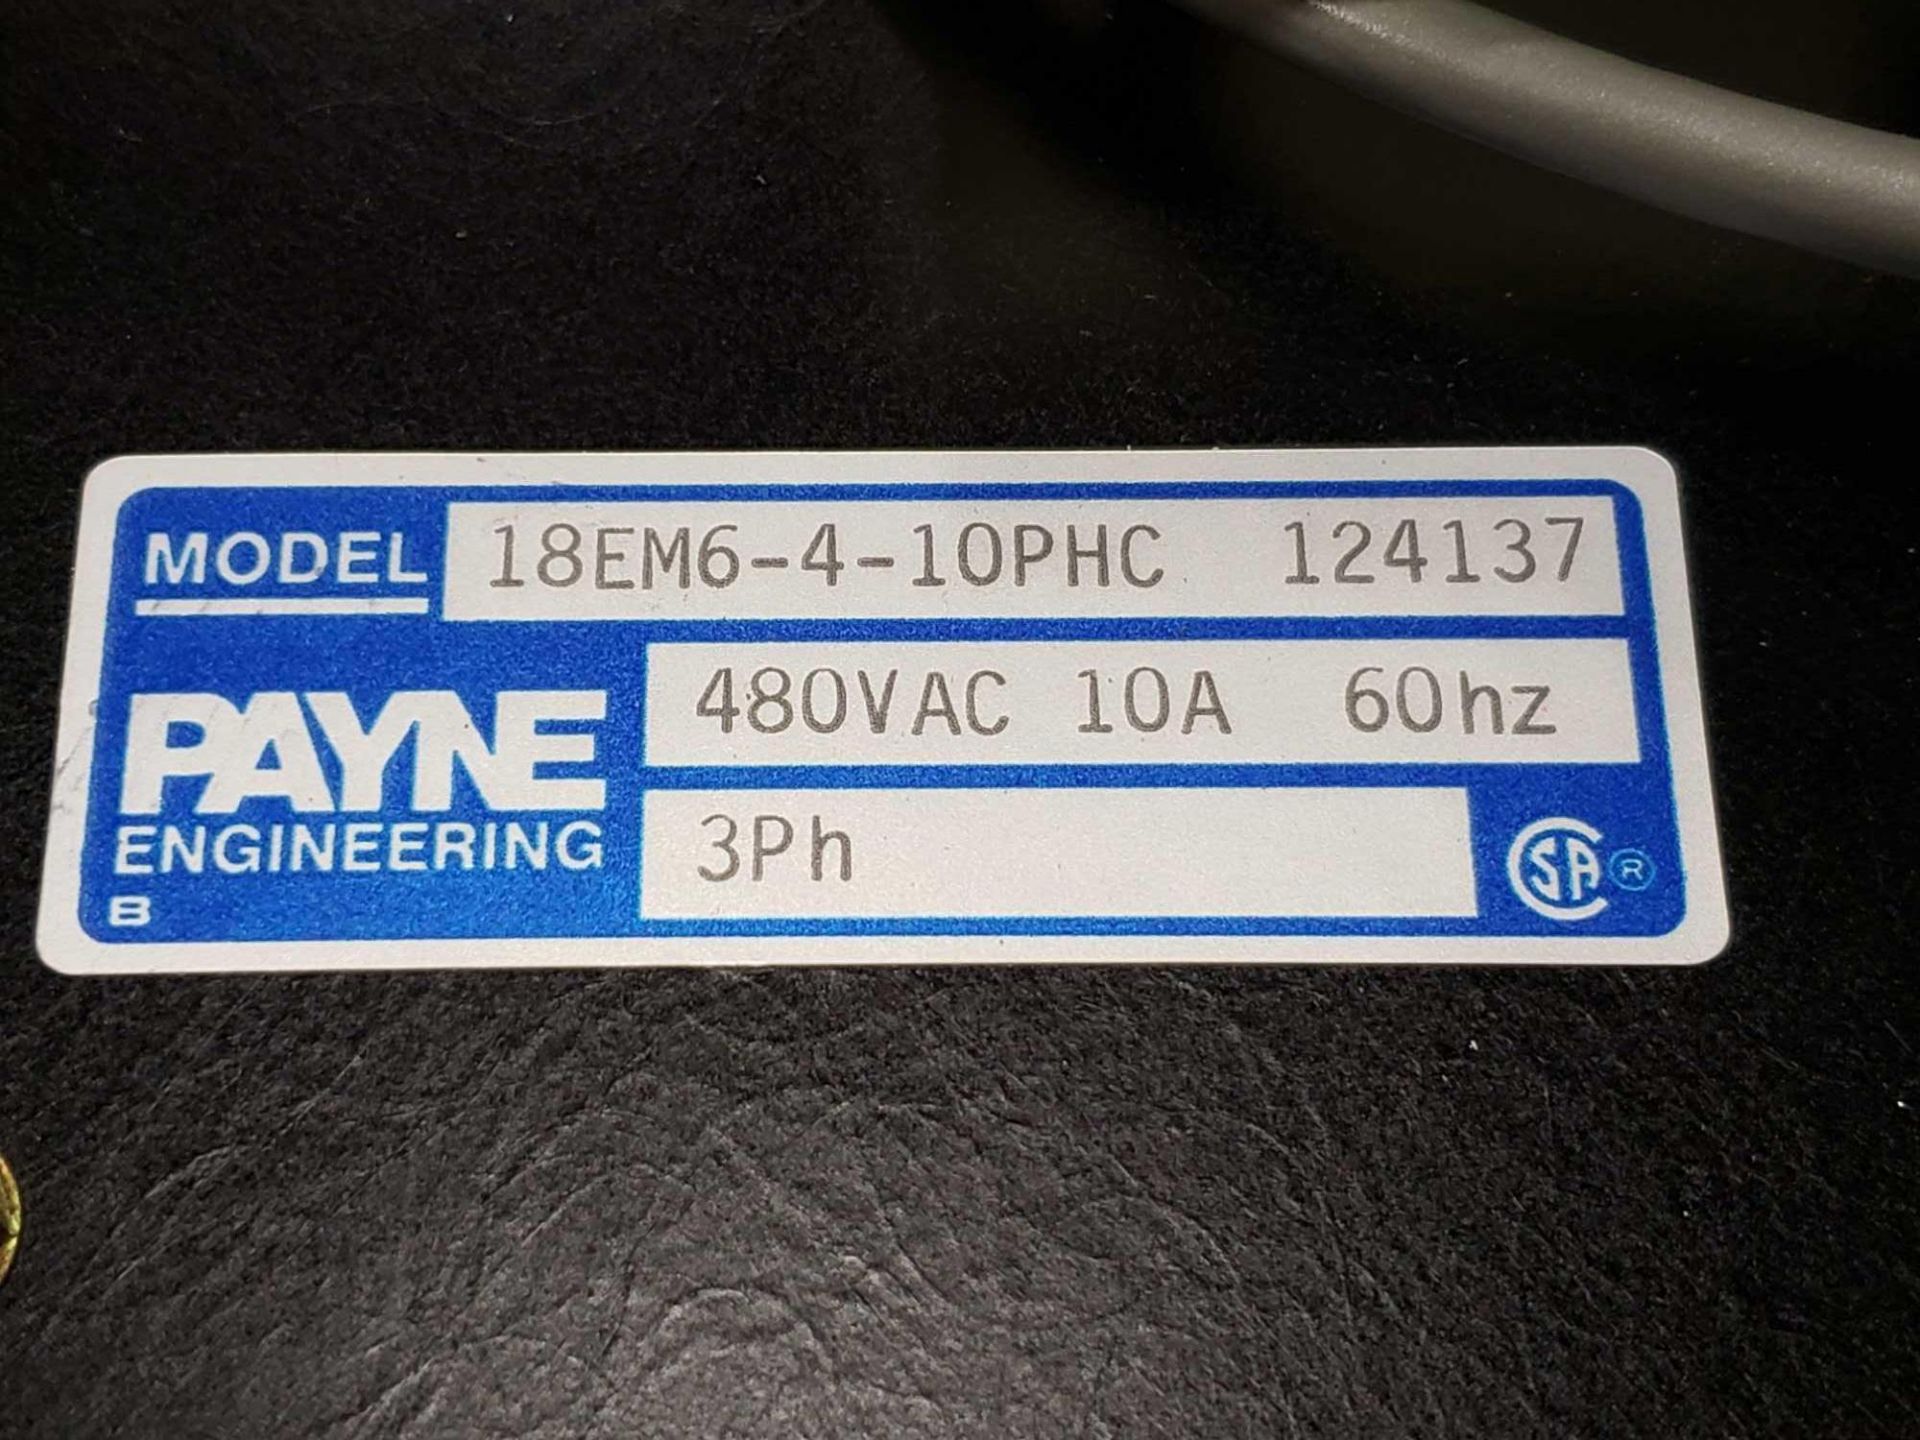 Payne Engineering power control model 18EM6-4-10PHC. 3 phase 480vac, 10amp, 60hz. New in plastic. - Image 2 of 2